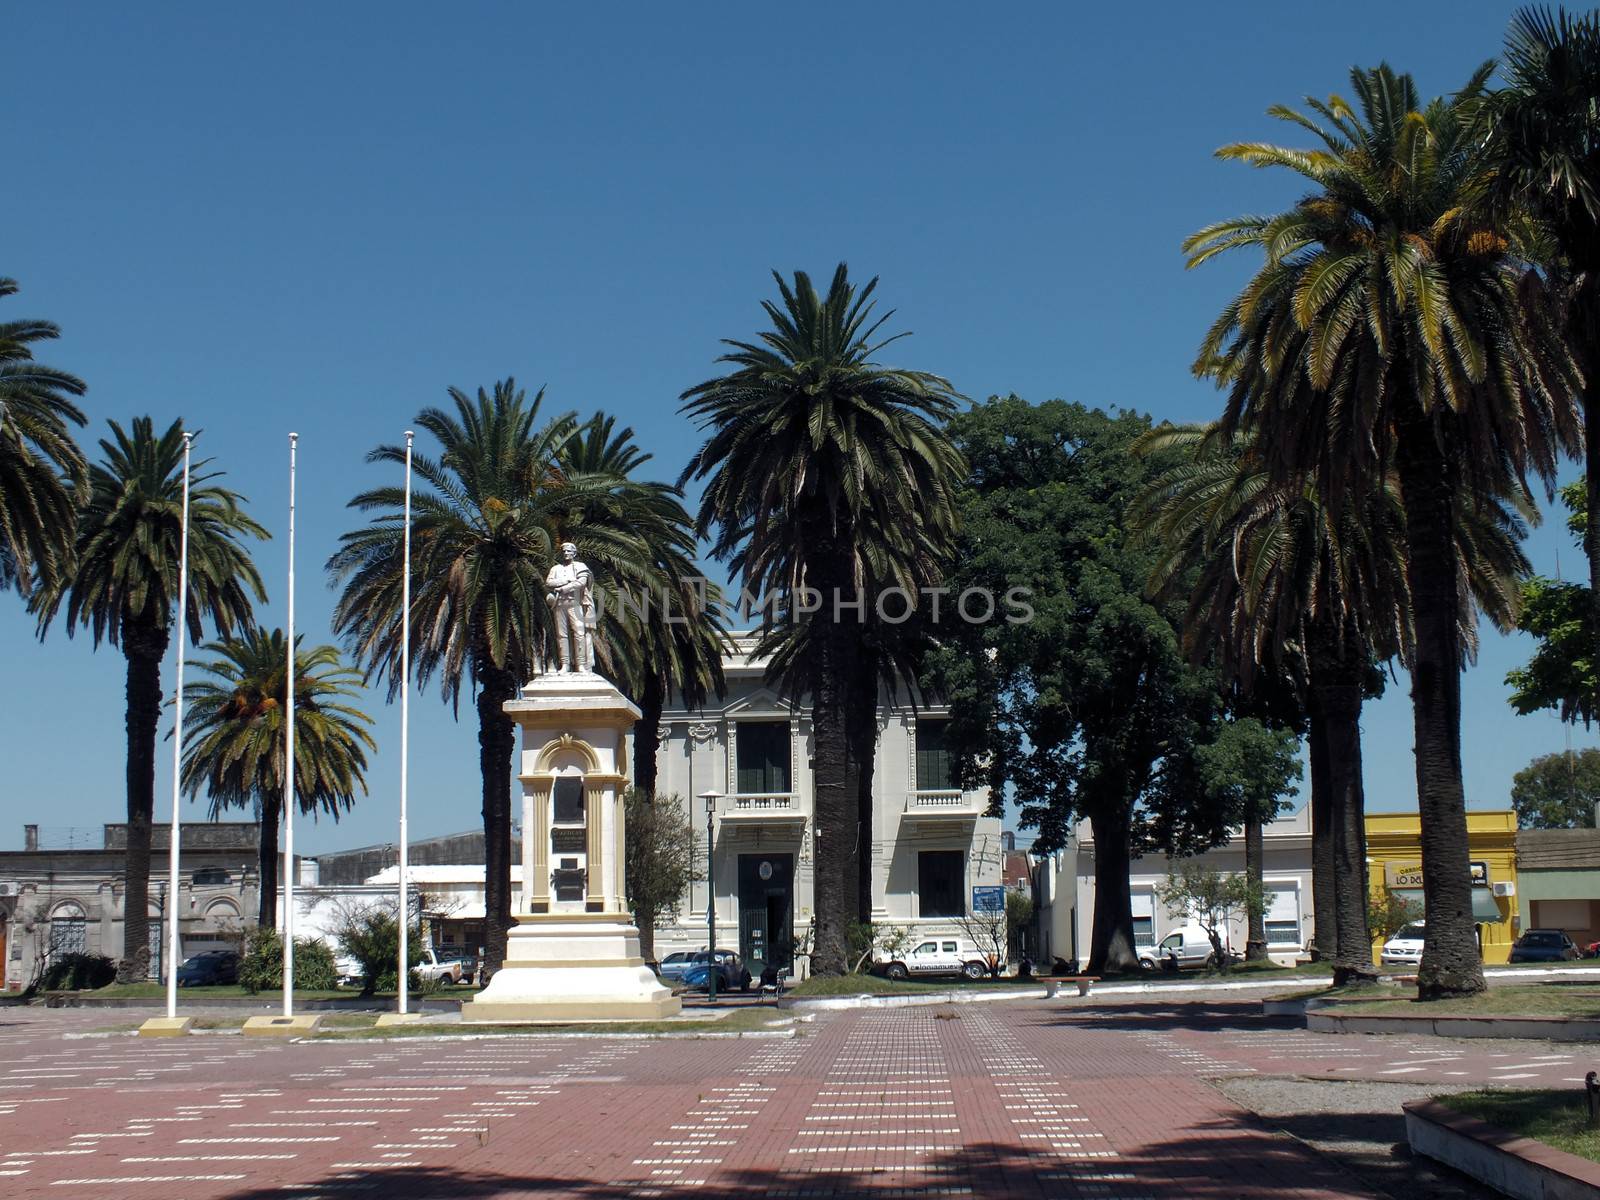 One of Carmelo's two squares is the Plaza Artigas with its statue of Artigas which was unveiled in 1916 to celebrate the town's centenary. The city is the only city founded personally by the Uruguayan national hero.